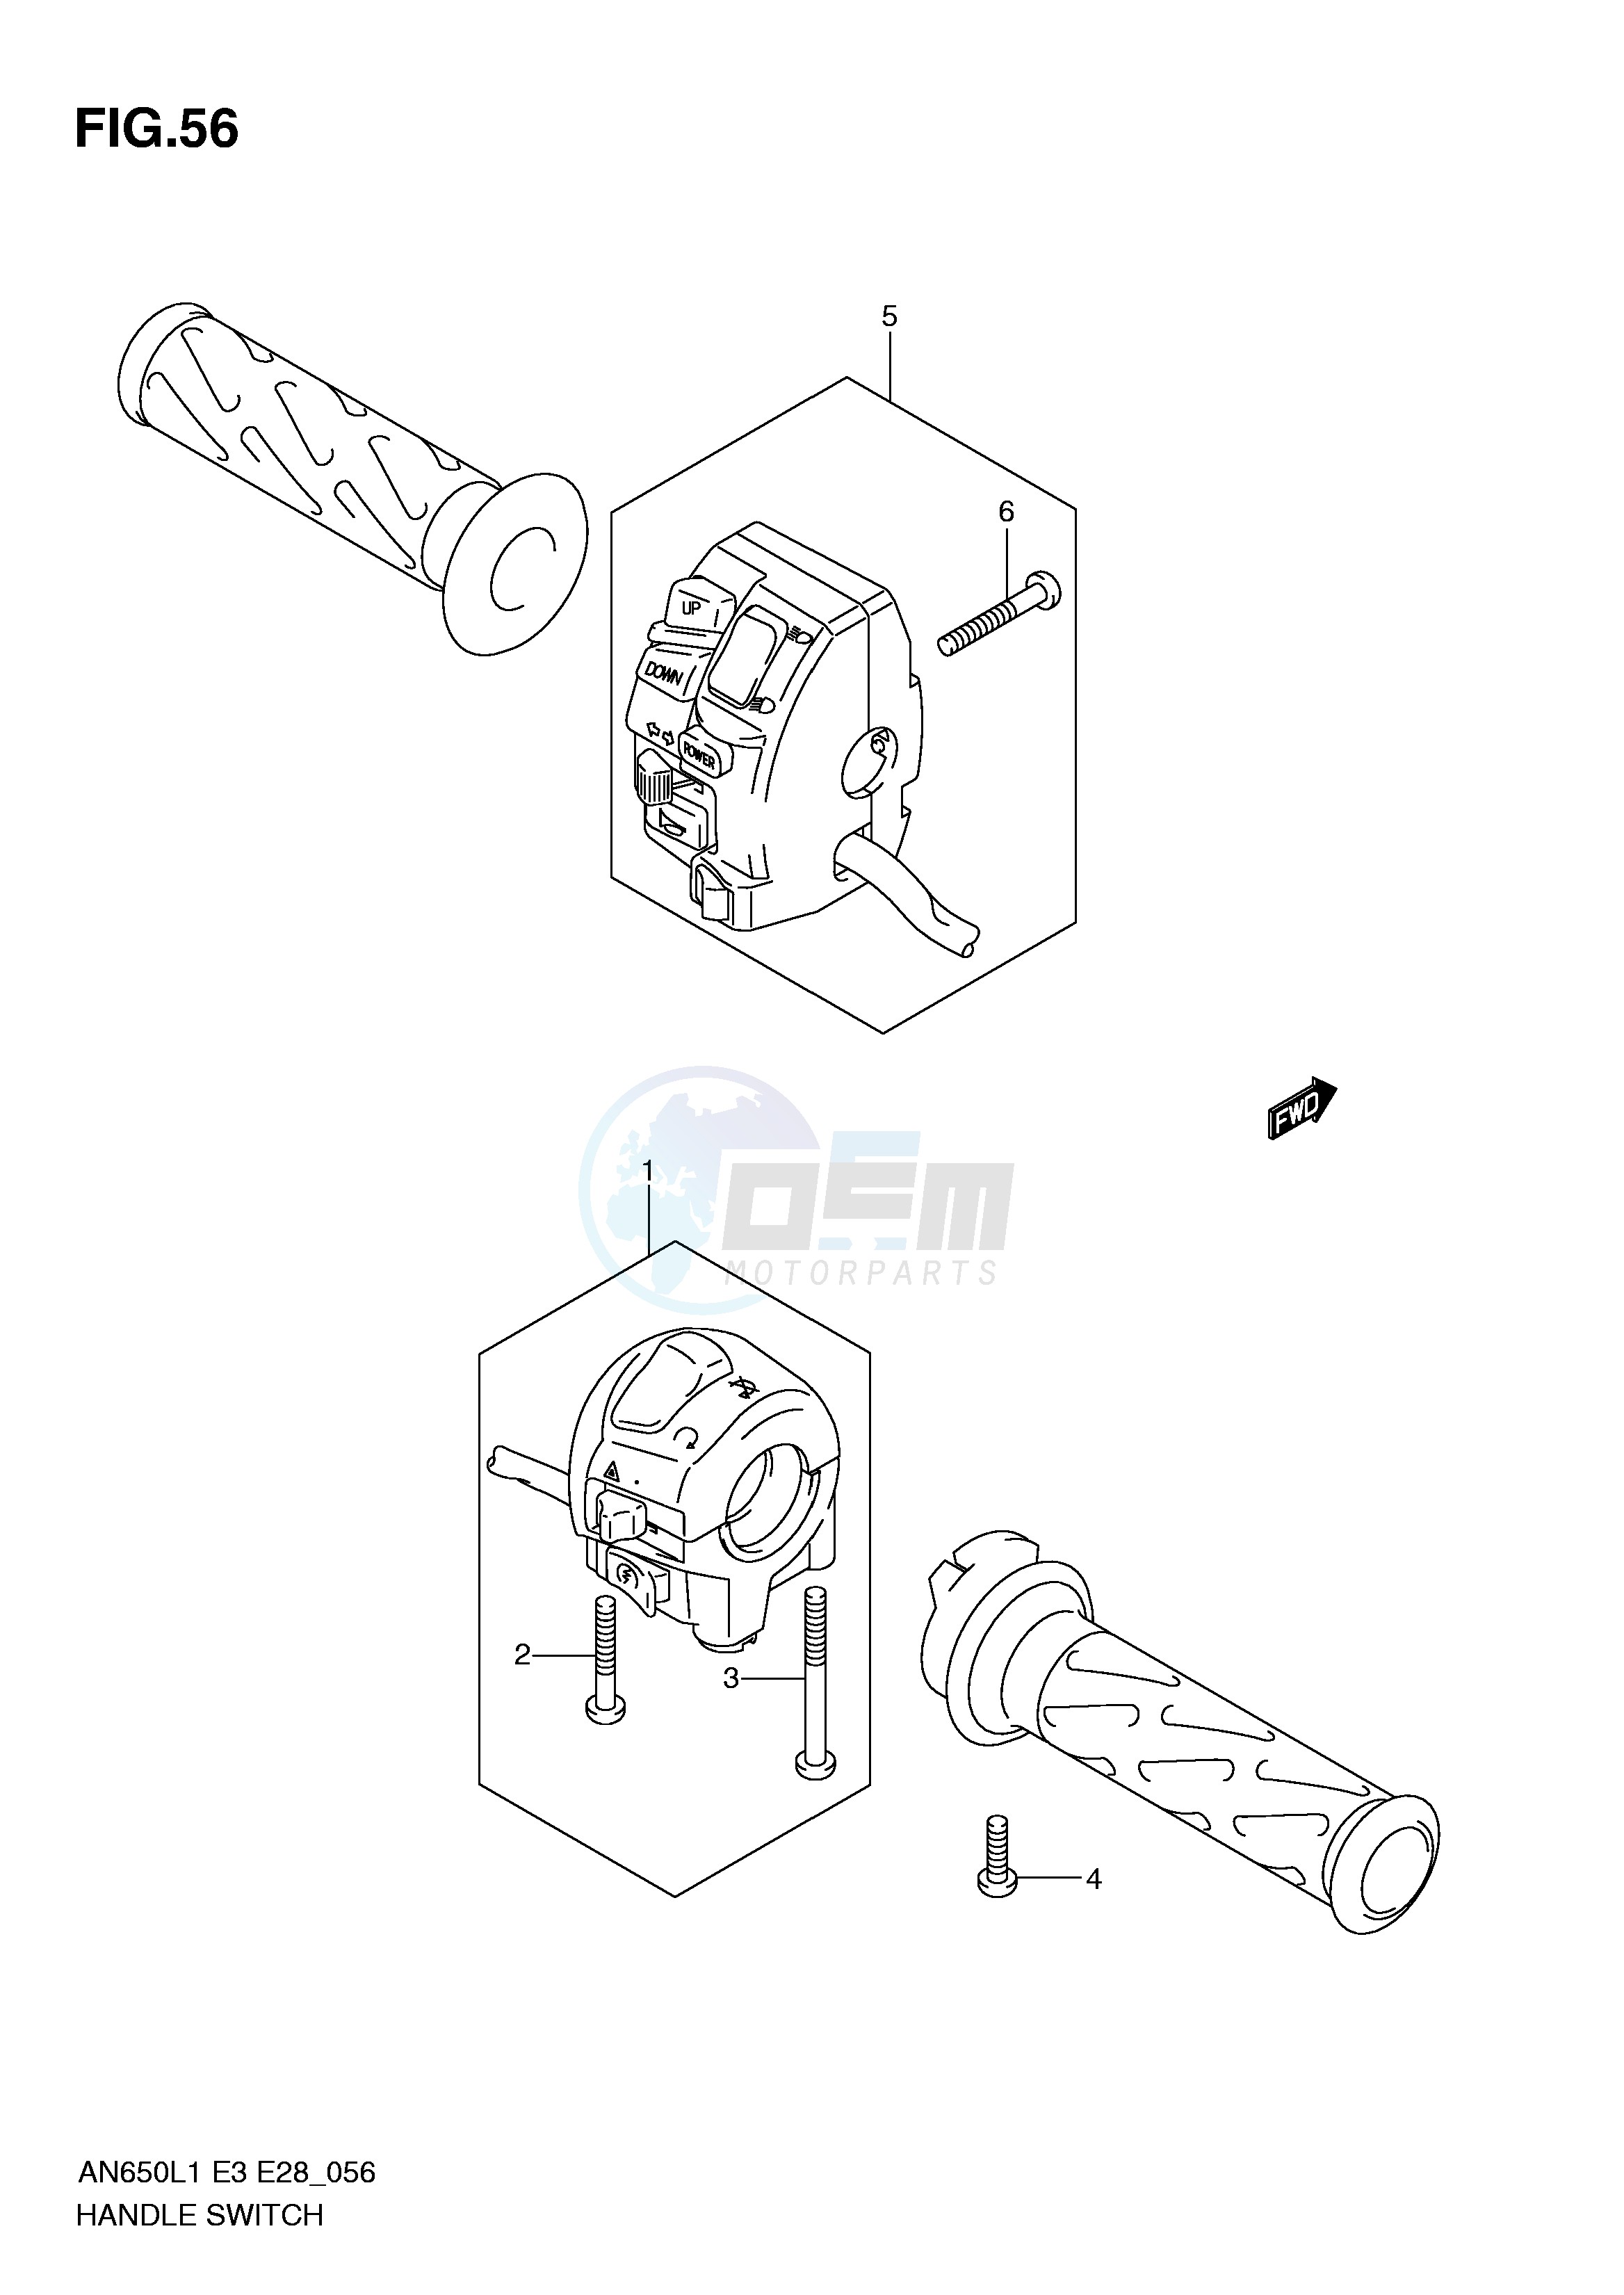 HANDLE SWITCH (AN650L1 E33) image